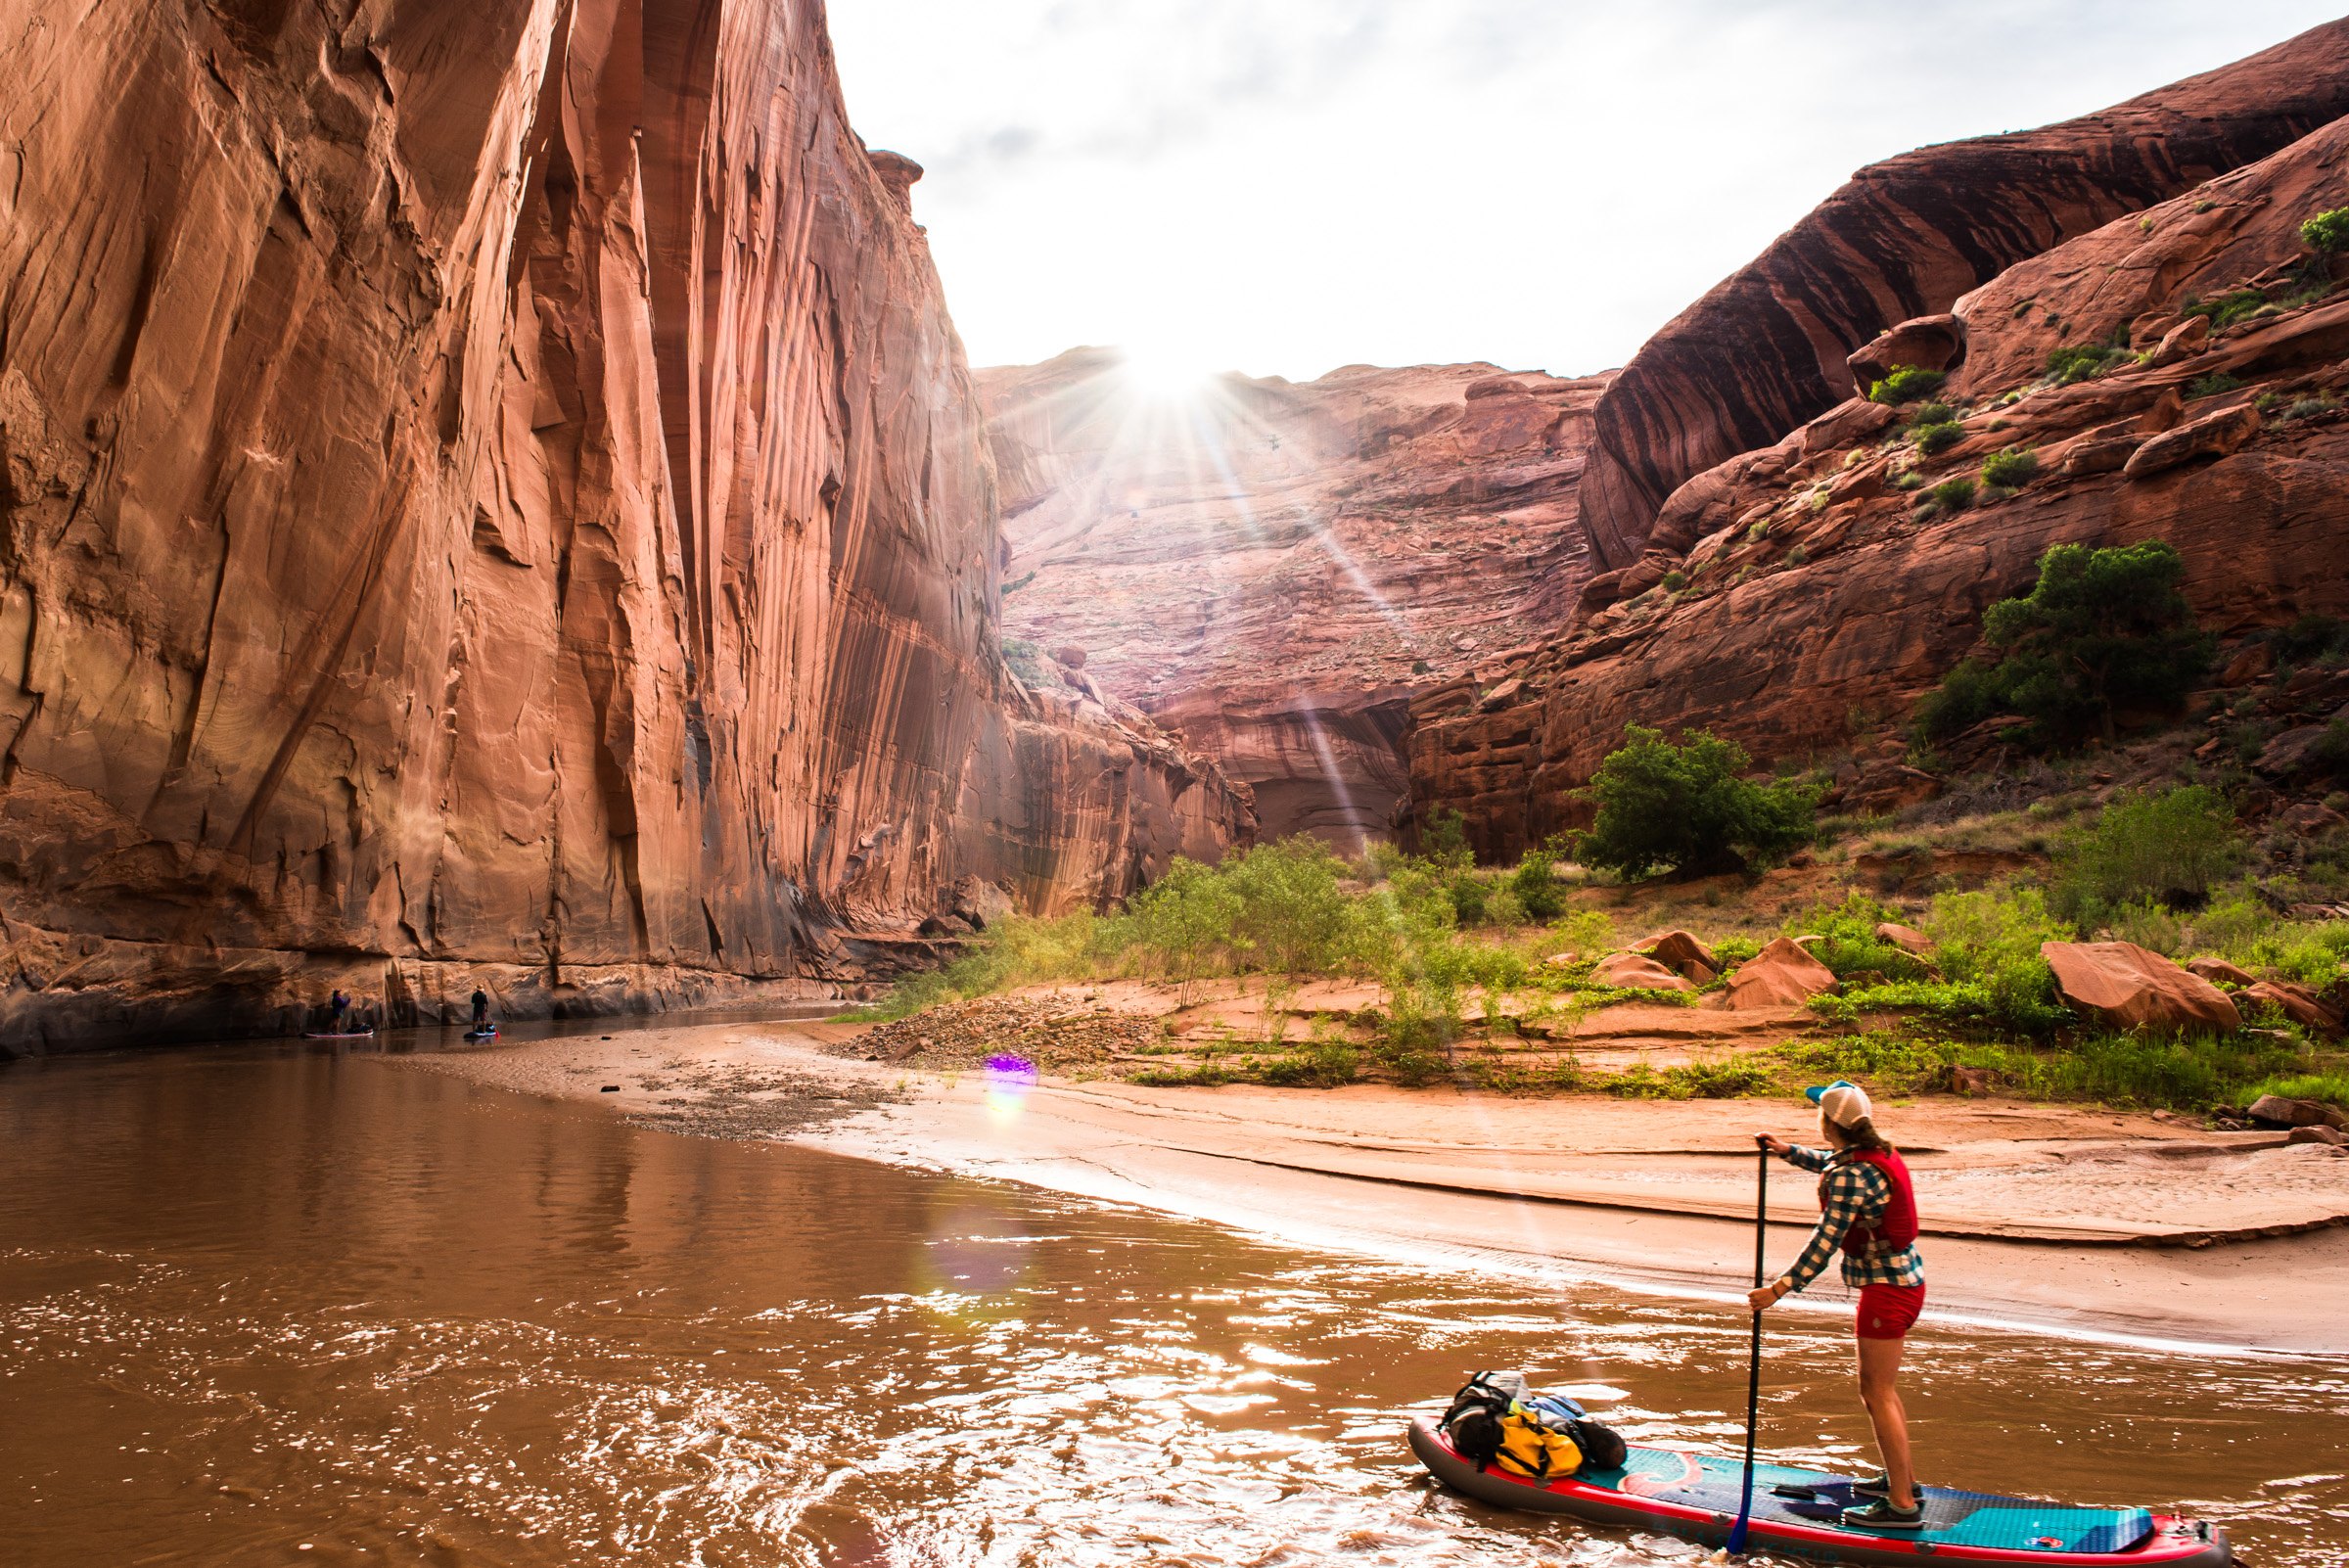 Morgan Tilton paddles into sunset on the Escalante River in southern Utah